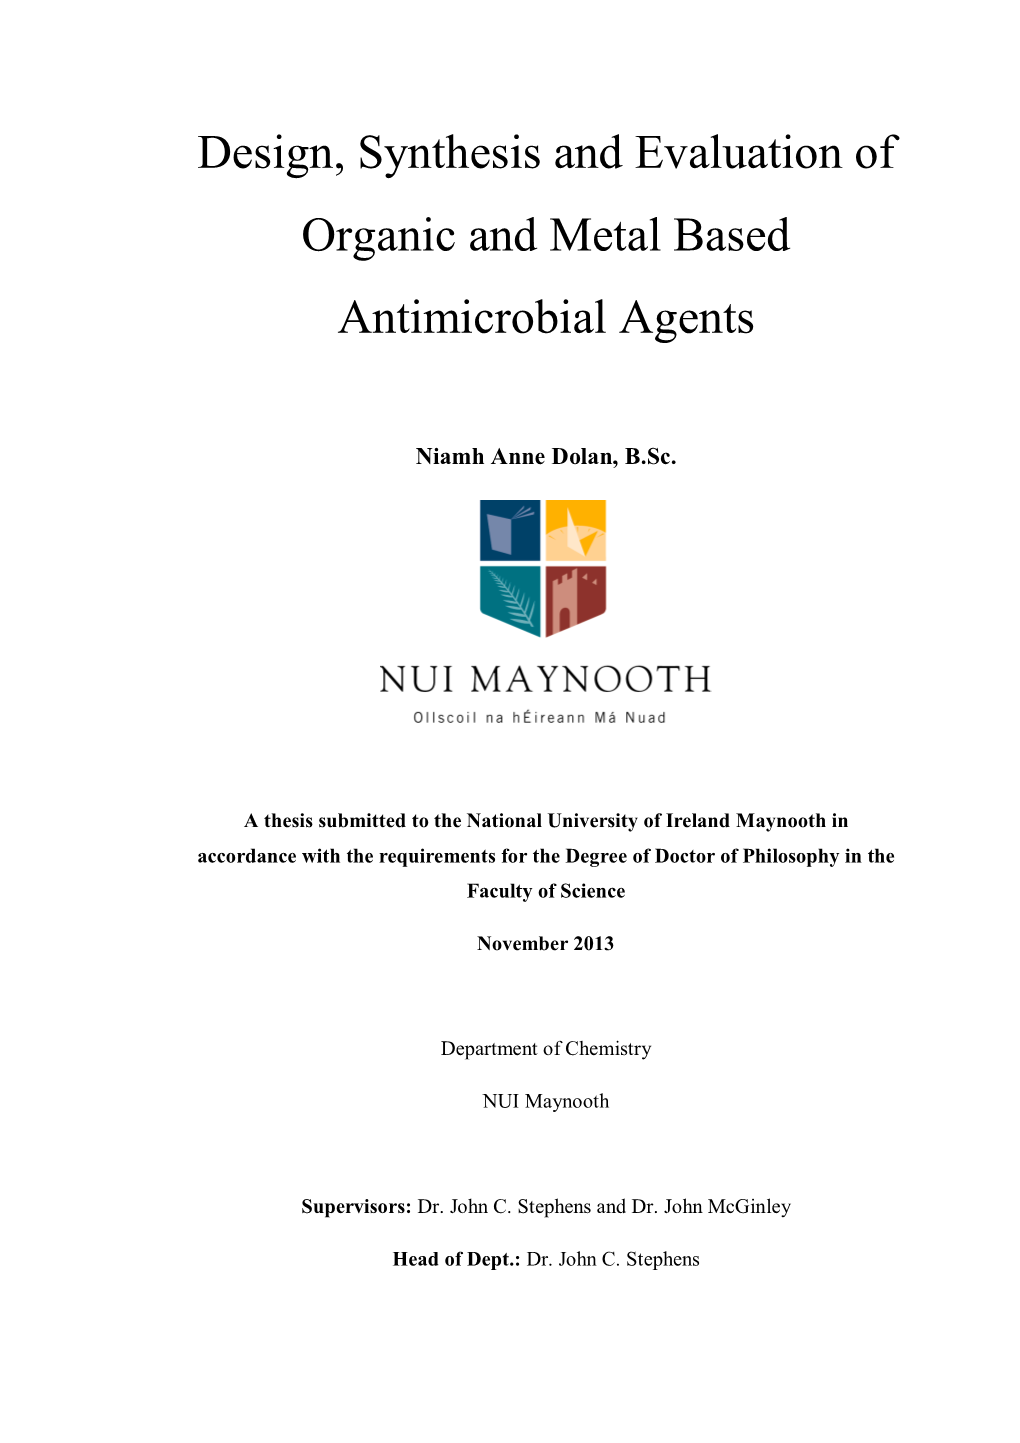 Design, Synthesis and Evaluation of Organic and Metal Based Antimicrobial Agents